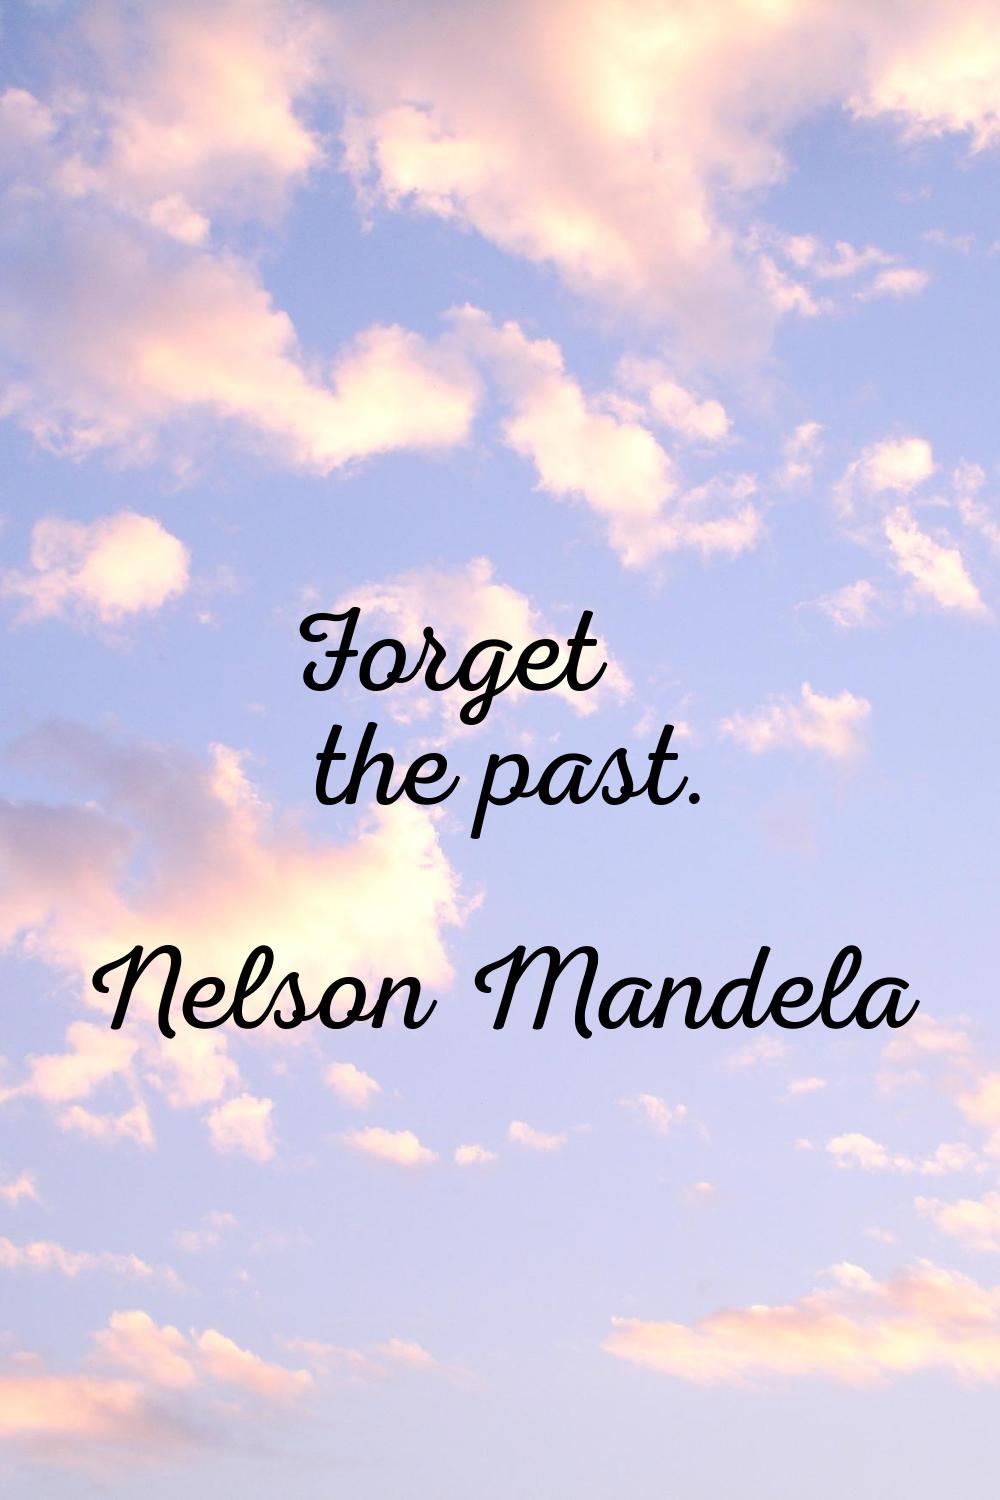 Forget the past.